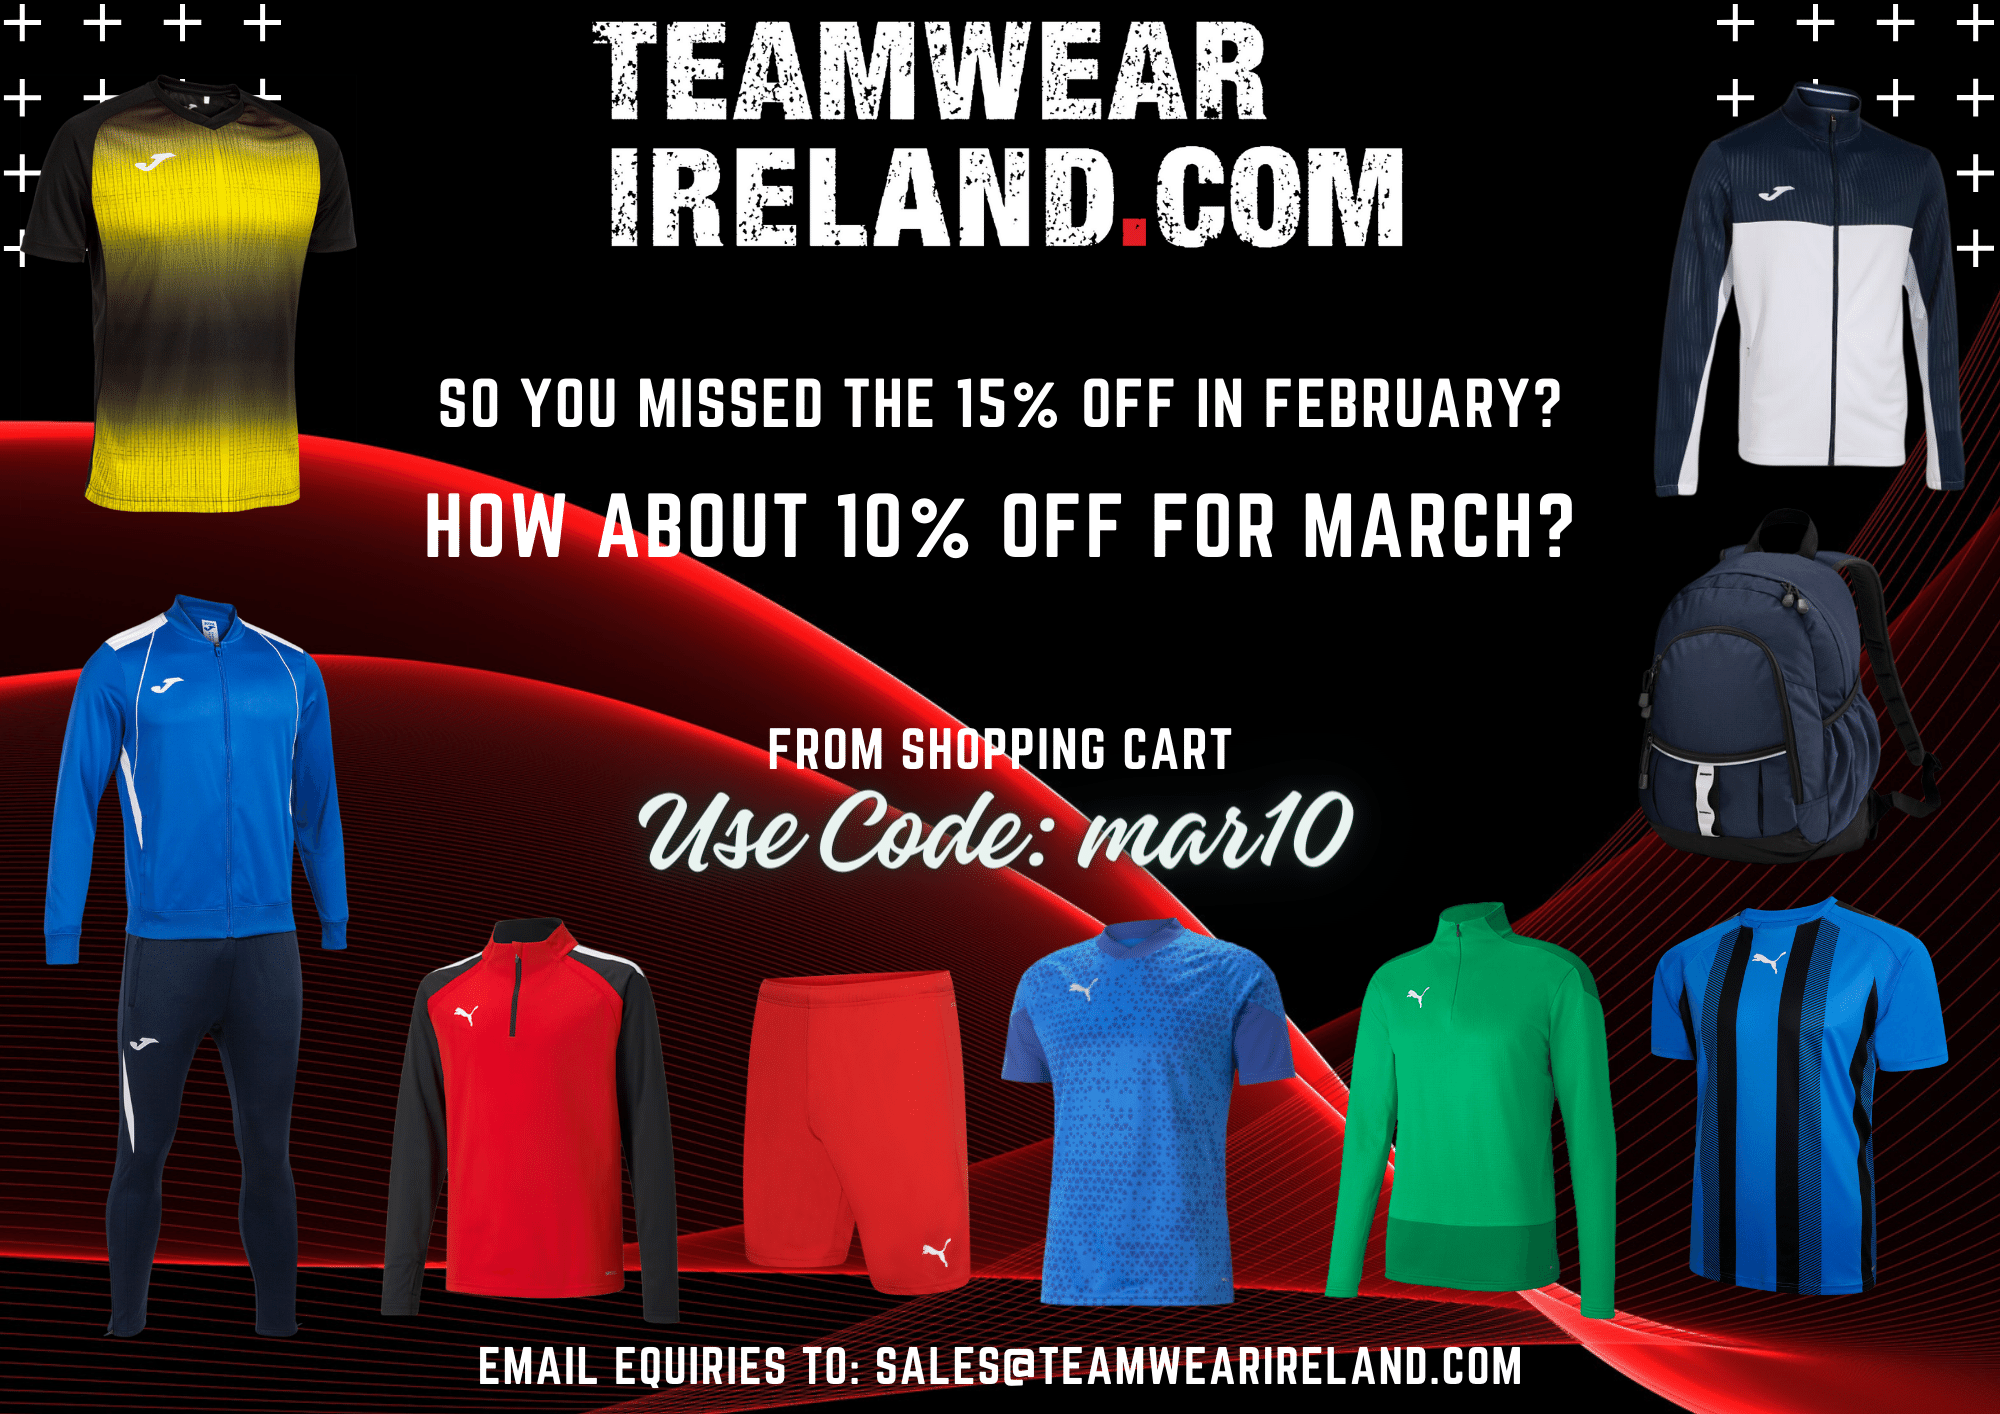 10% off in March - Use code: mar10